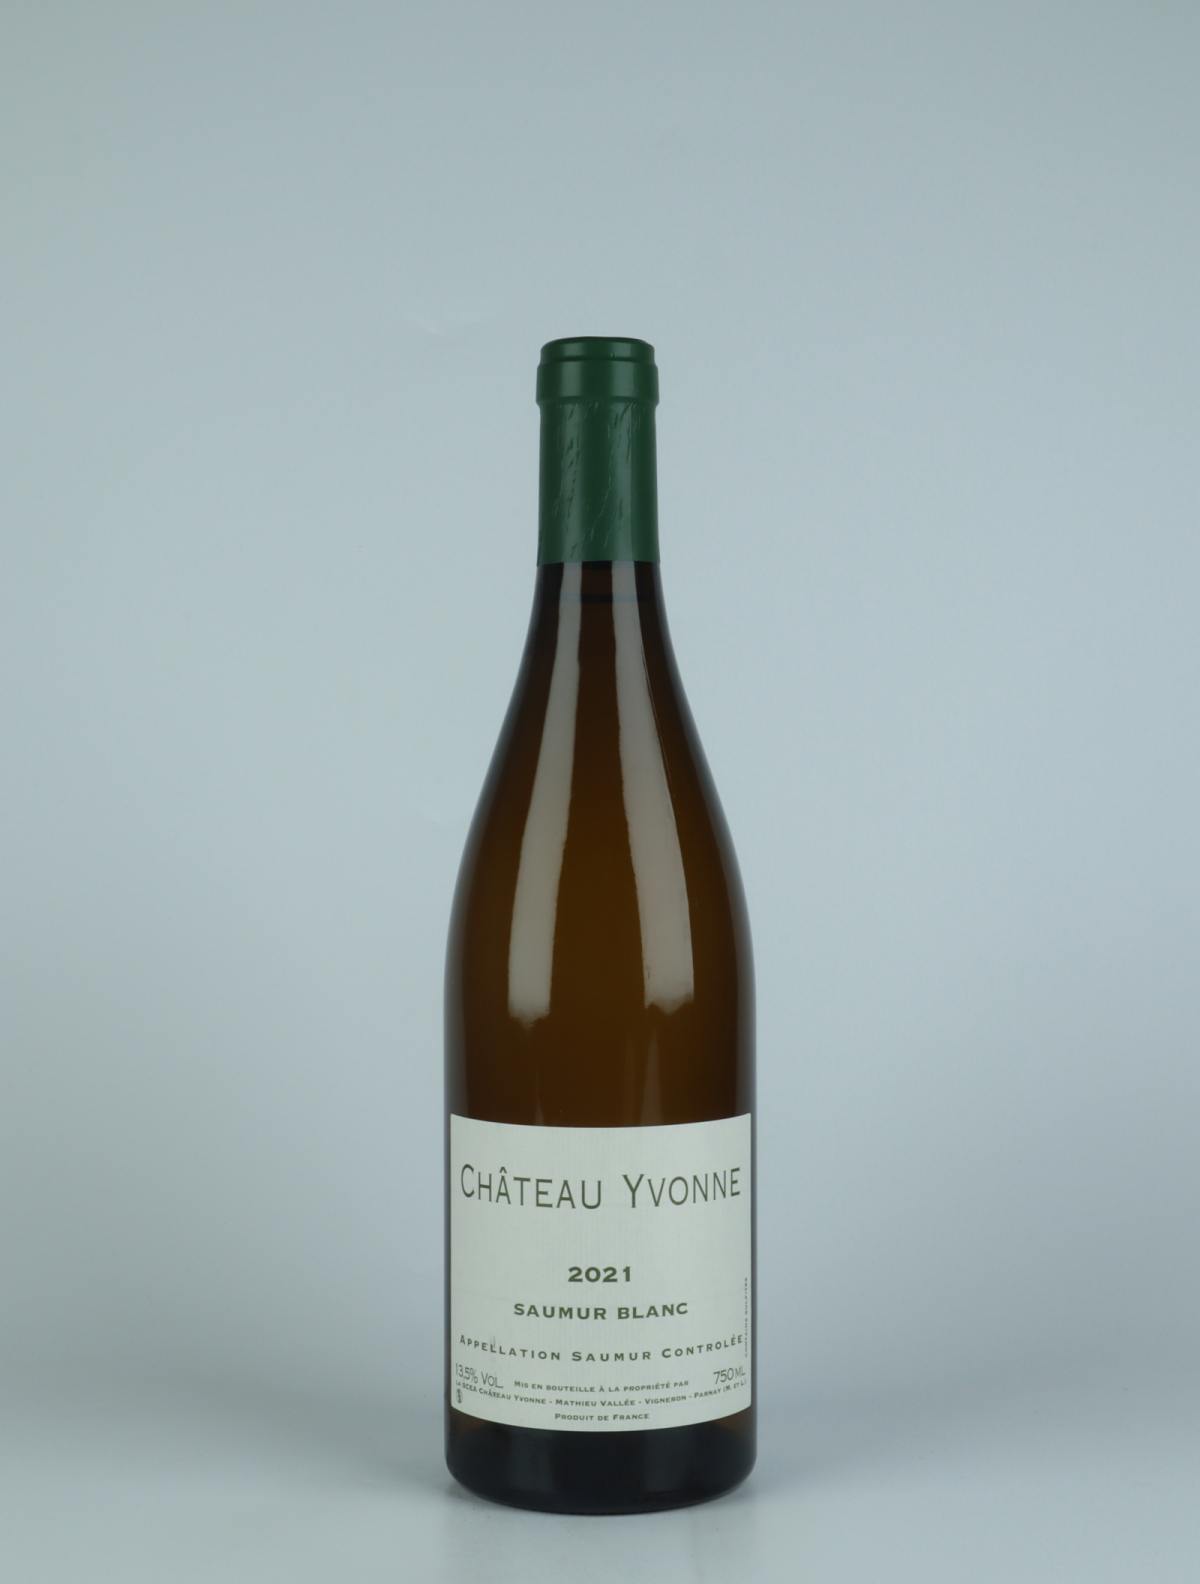 A bottle 2021 Saumur Blanc White wine from Château Yvonne, Loire in France